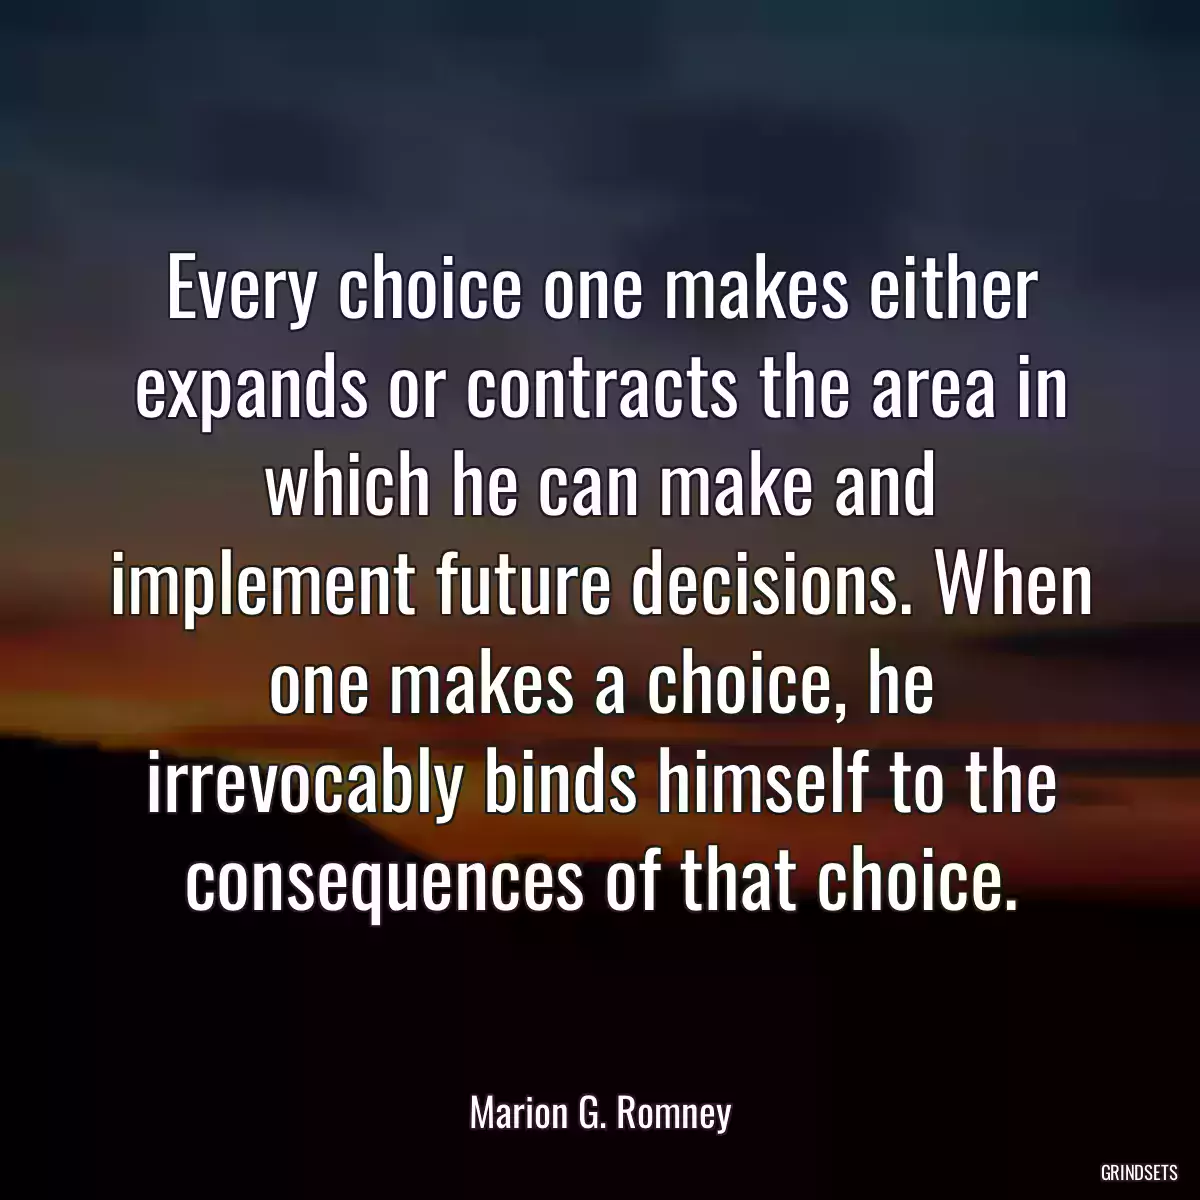 Every choice one makes either expands or contracts the area in which he can make and implement future decisions. When one makes a choice, he irrevocably binds himself to the consequences of that choice.